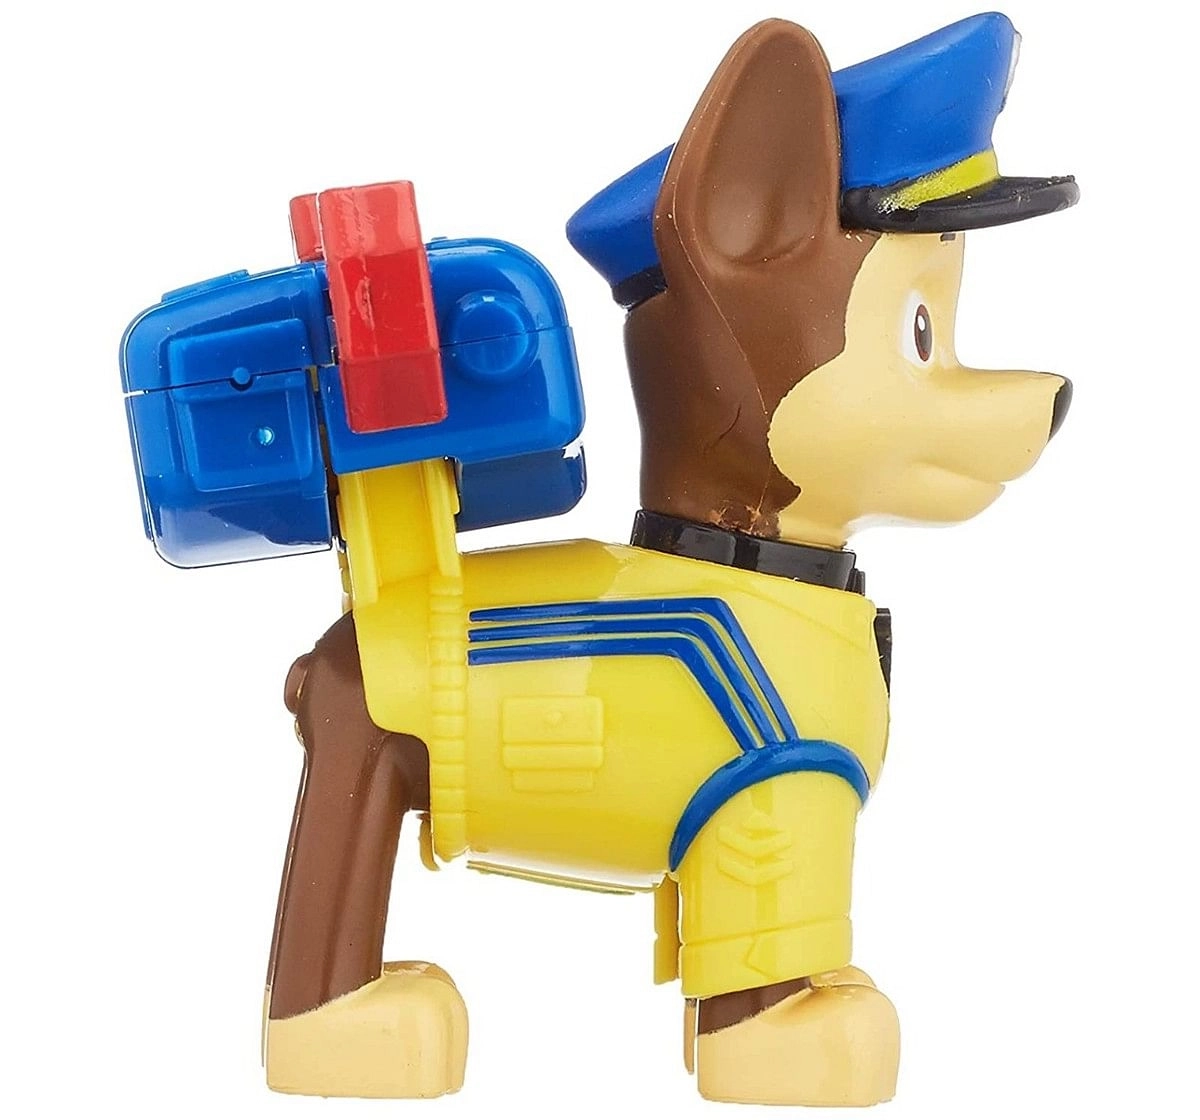 Paw Patrol Assorted Pup 6 Act Pack Activity Toys for Kids age 3Y+ 